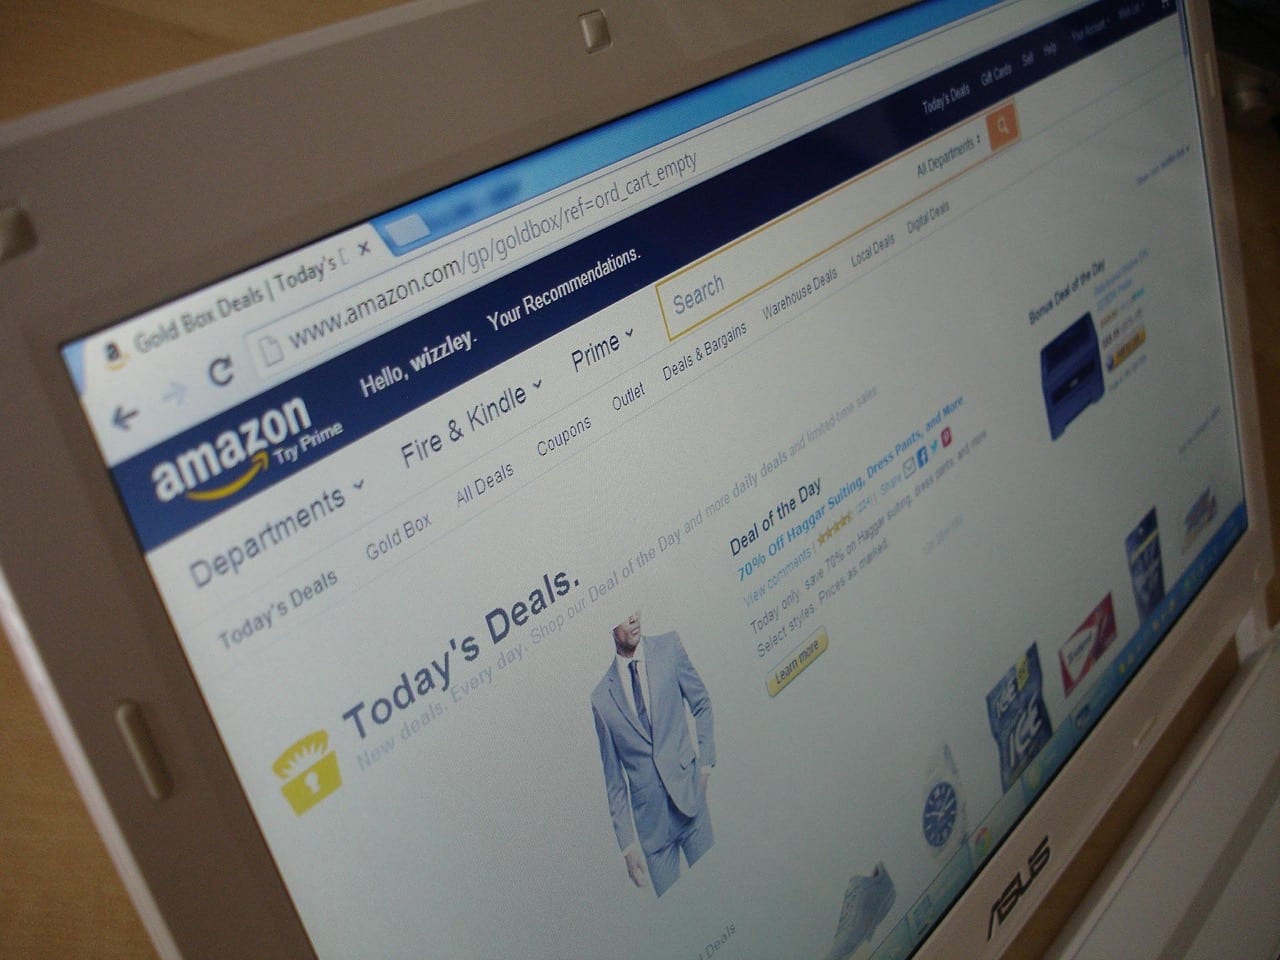 Amazon is expanding to Nigeria and South Africa